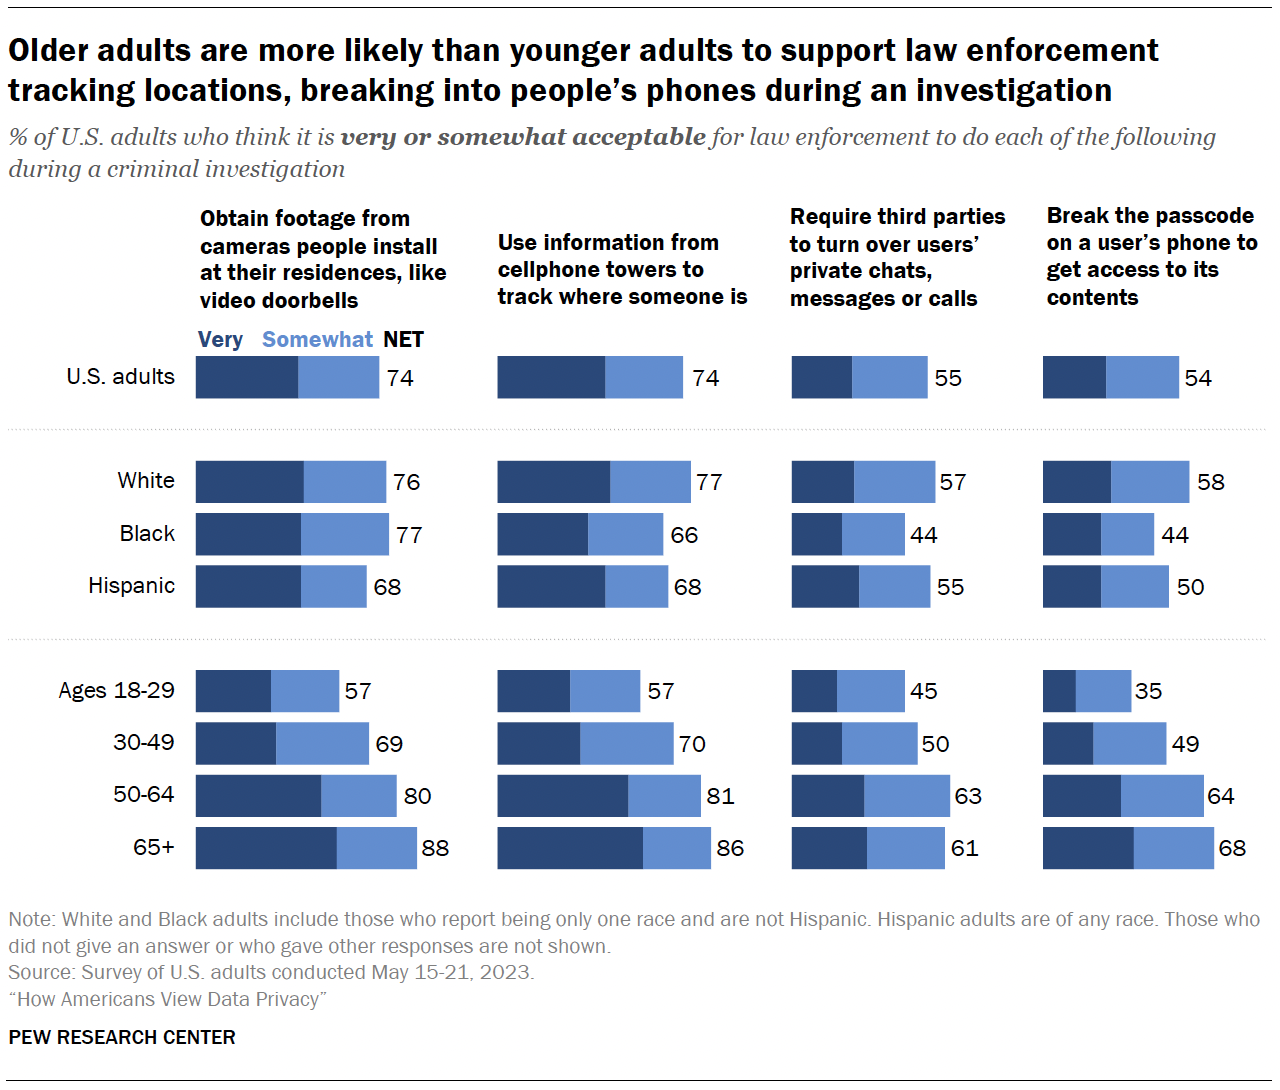 Older adults are more likely than younger adults to support law enforcement tracking locations, breaking into people’s phones during an investigation